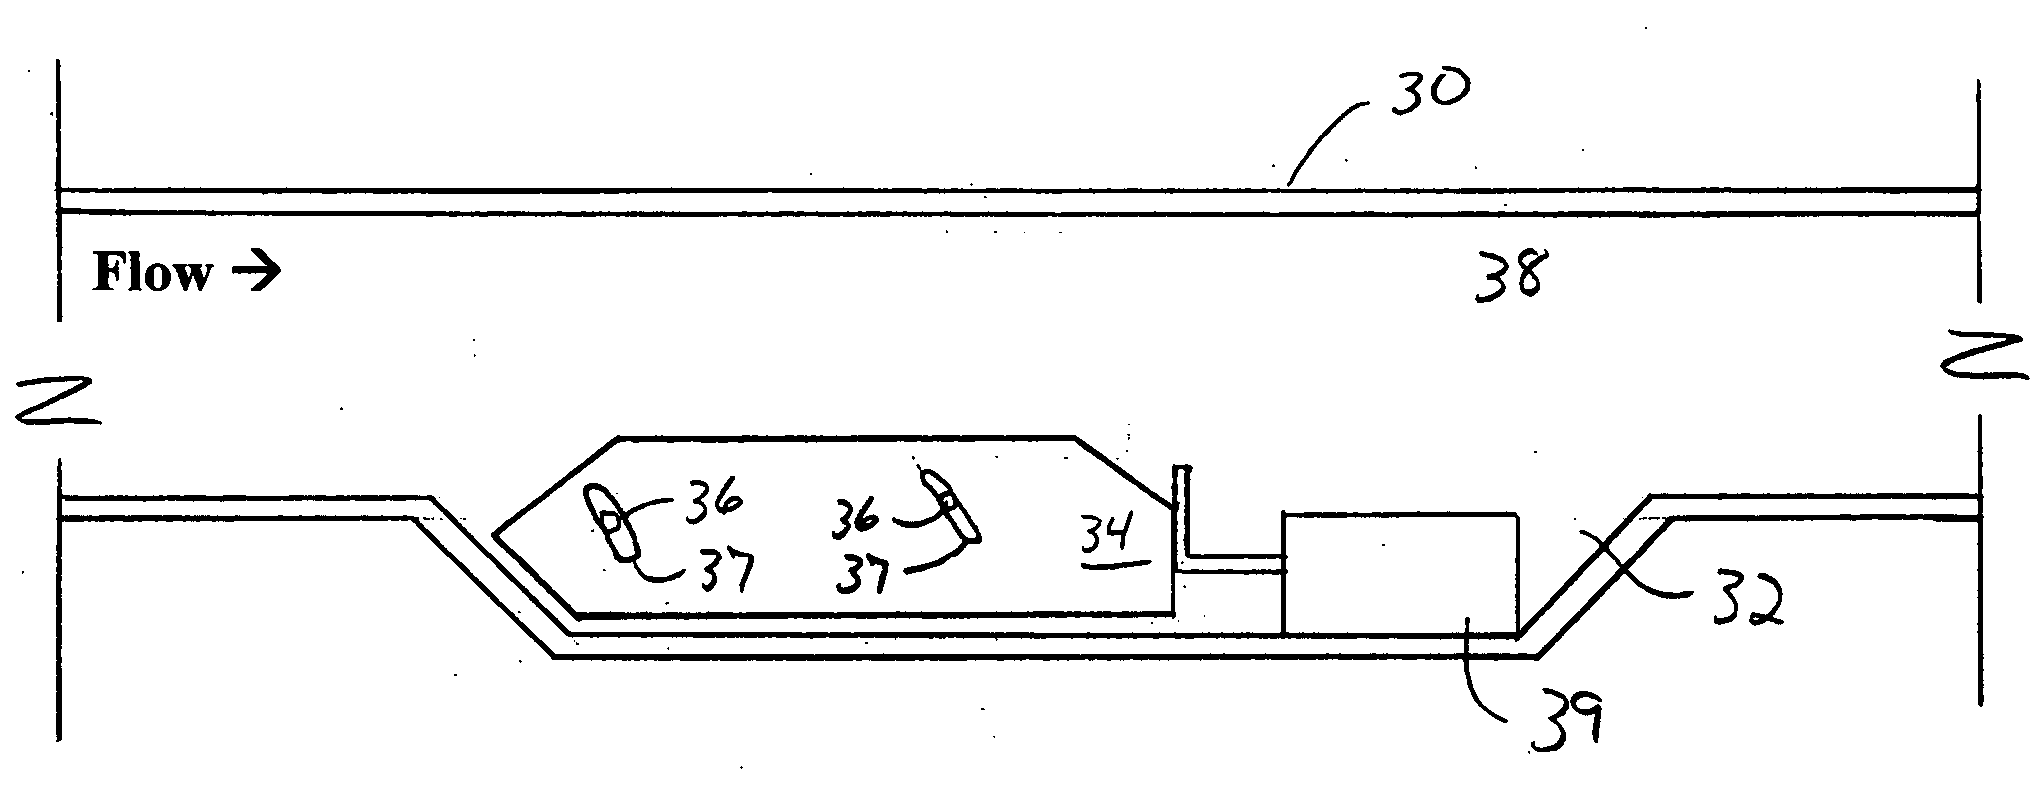 Variable flow device